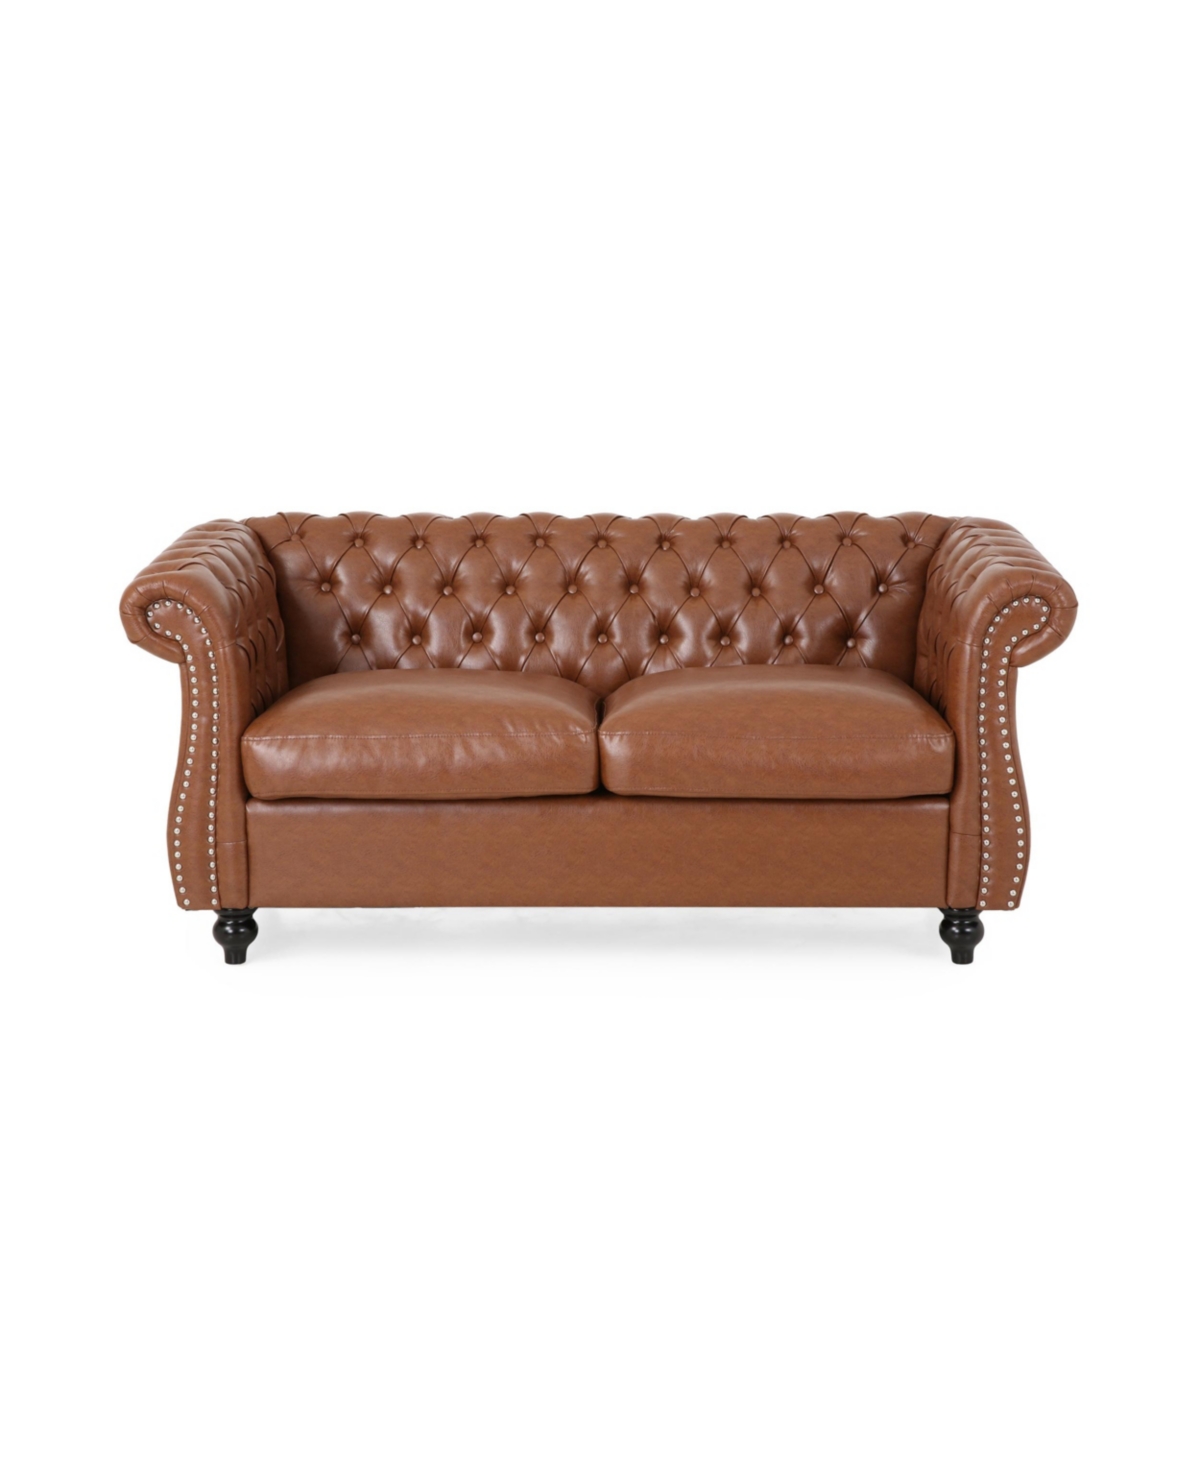 Silverdale Traditional Chesterfield Loveseat